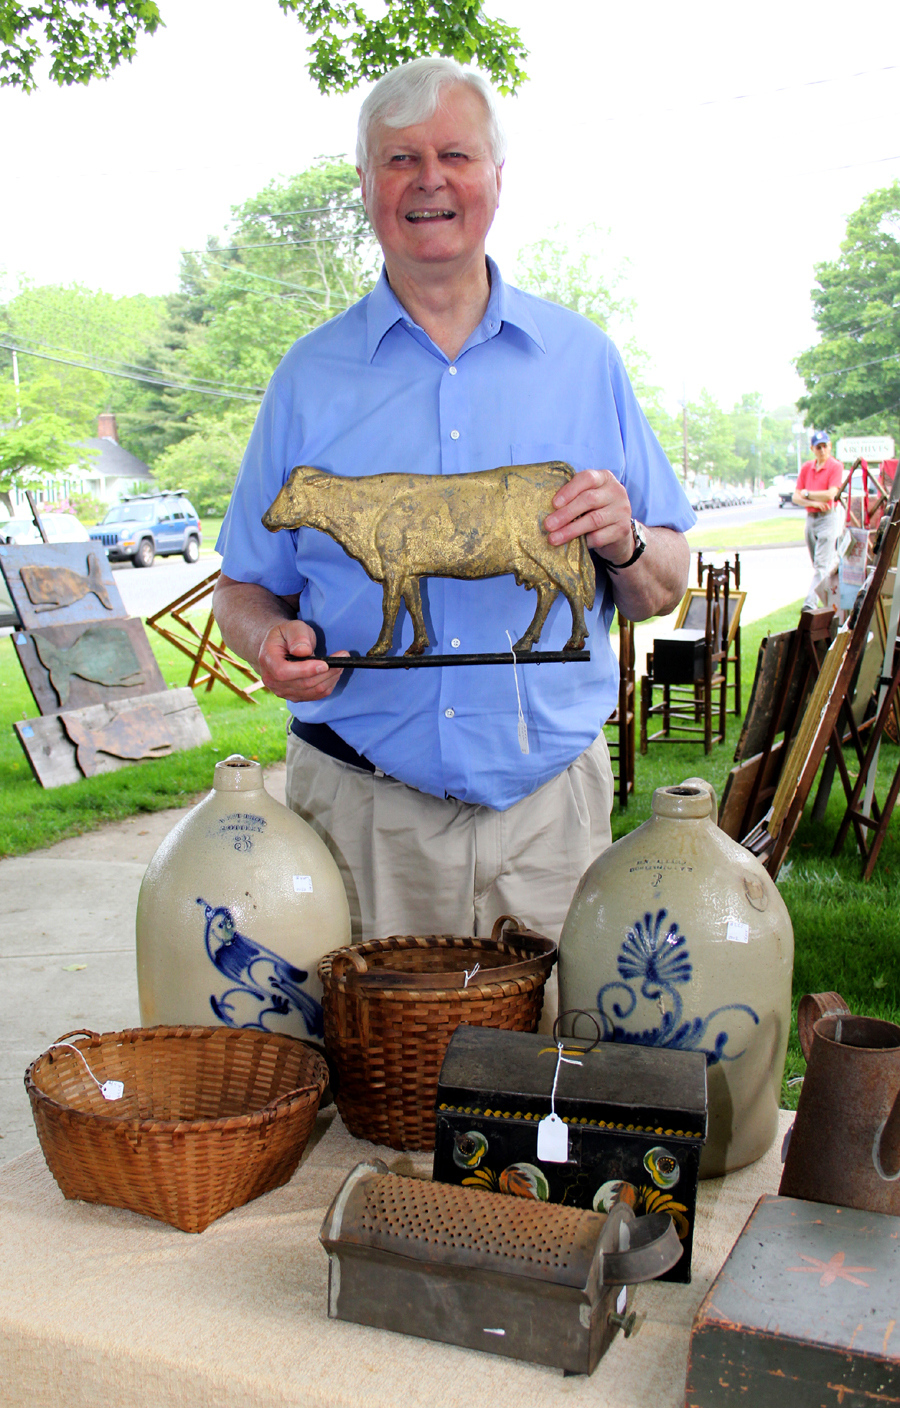 Fresh from Skinner’s sale of his personal collection, Killingworth, Conn., dealer Lewis Scranton was back to work, selling folk art from his regular spot under a large tree.